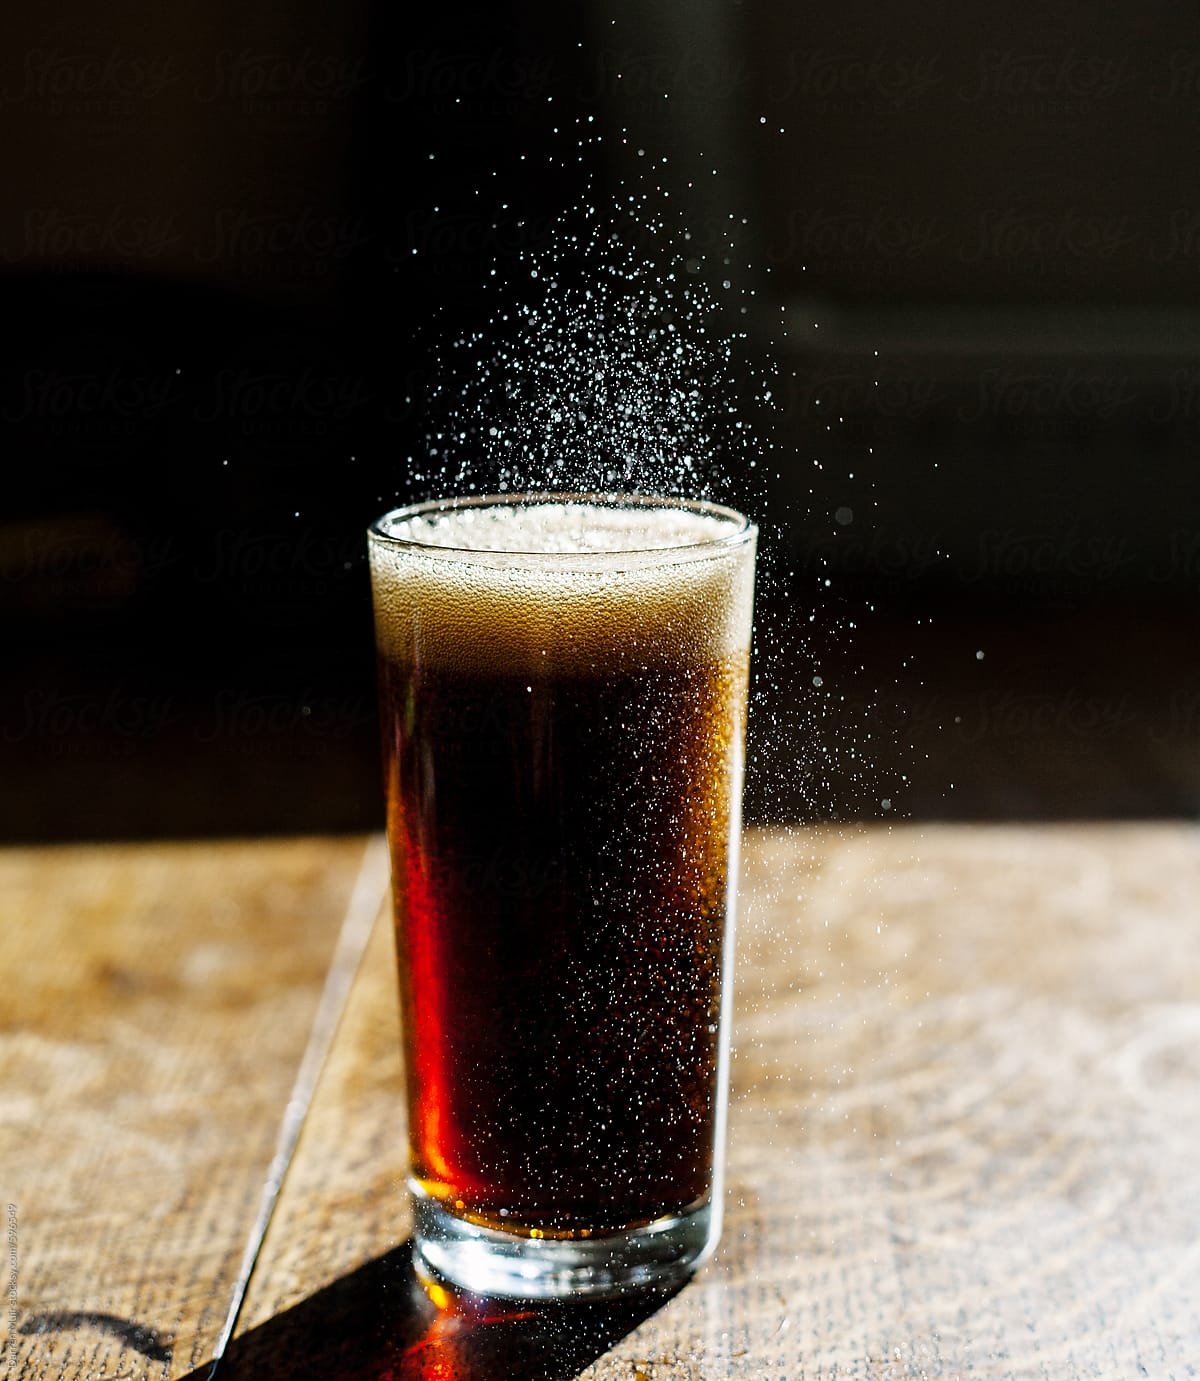 Fizzing glass of cola on wooden table.